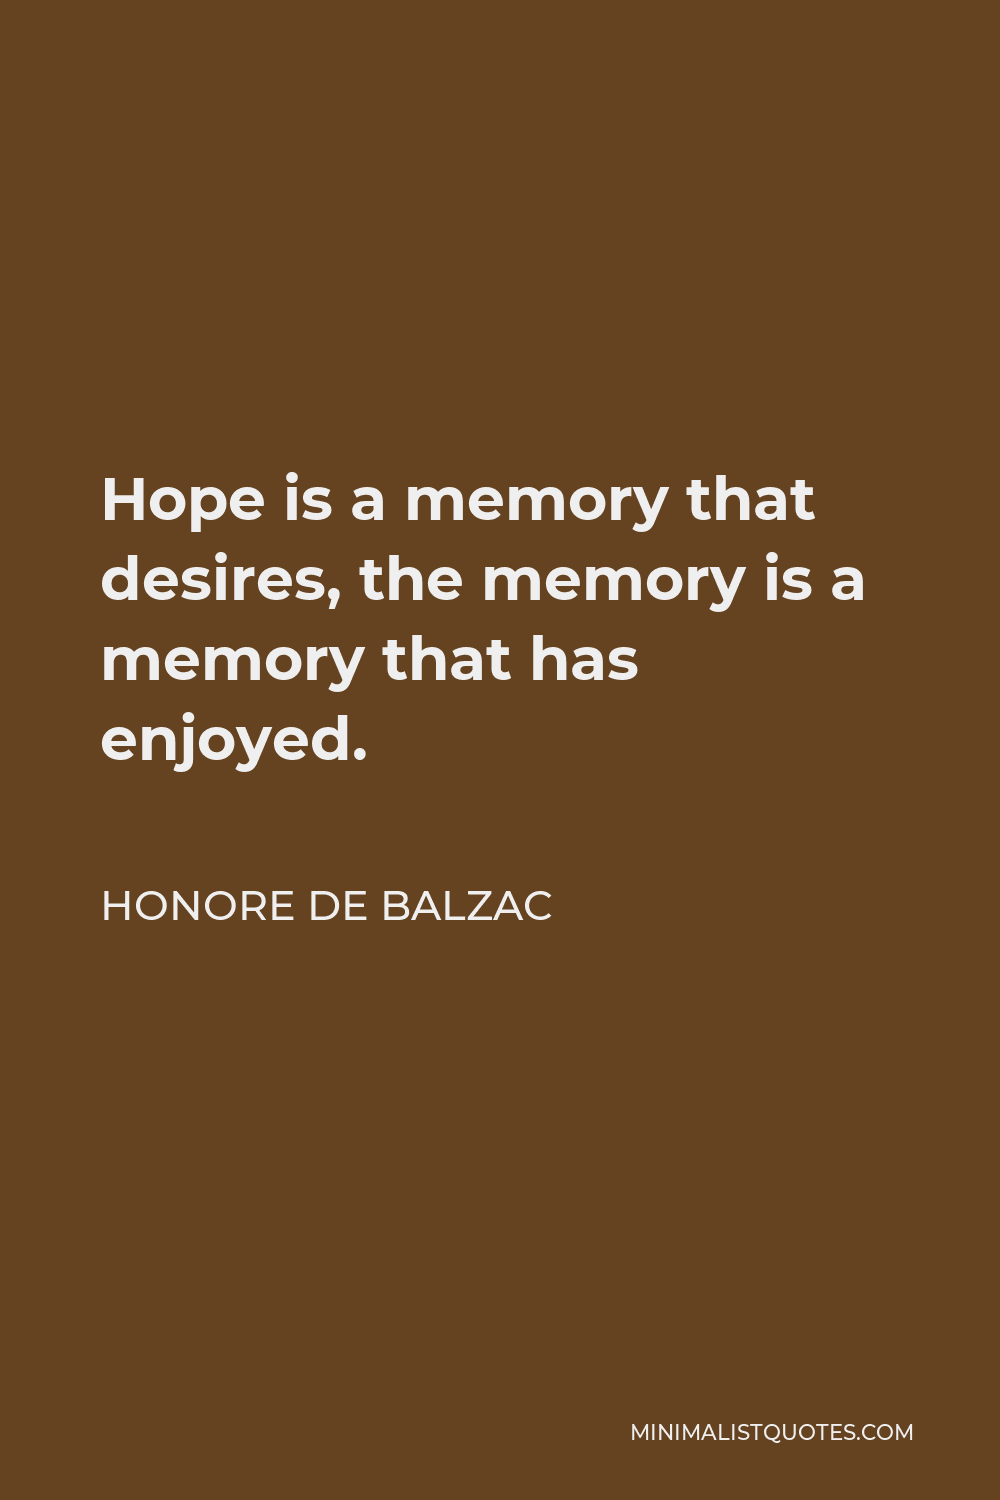 Honore de Balzac Quote - Hope is a memory that desires, the memory is a memory that has enjoyed.